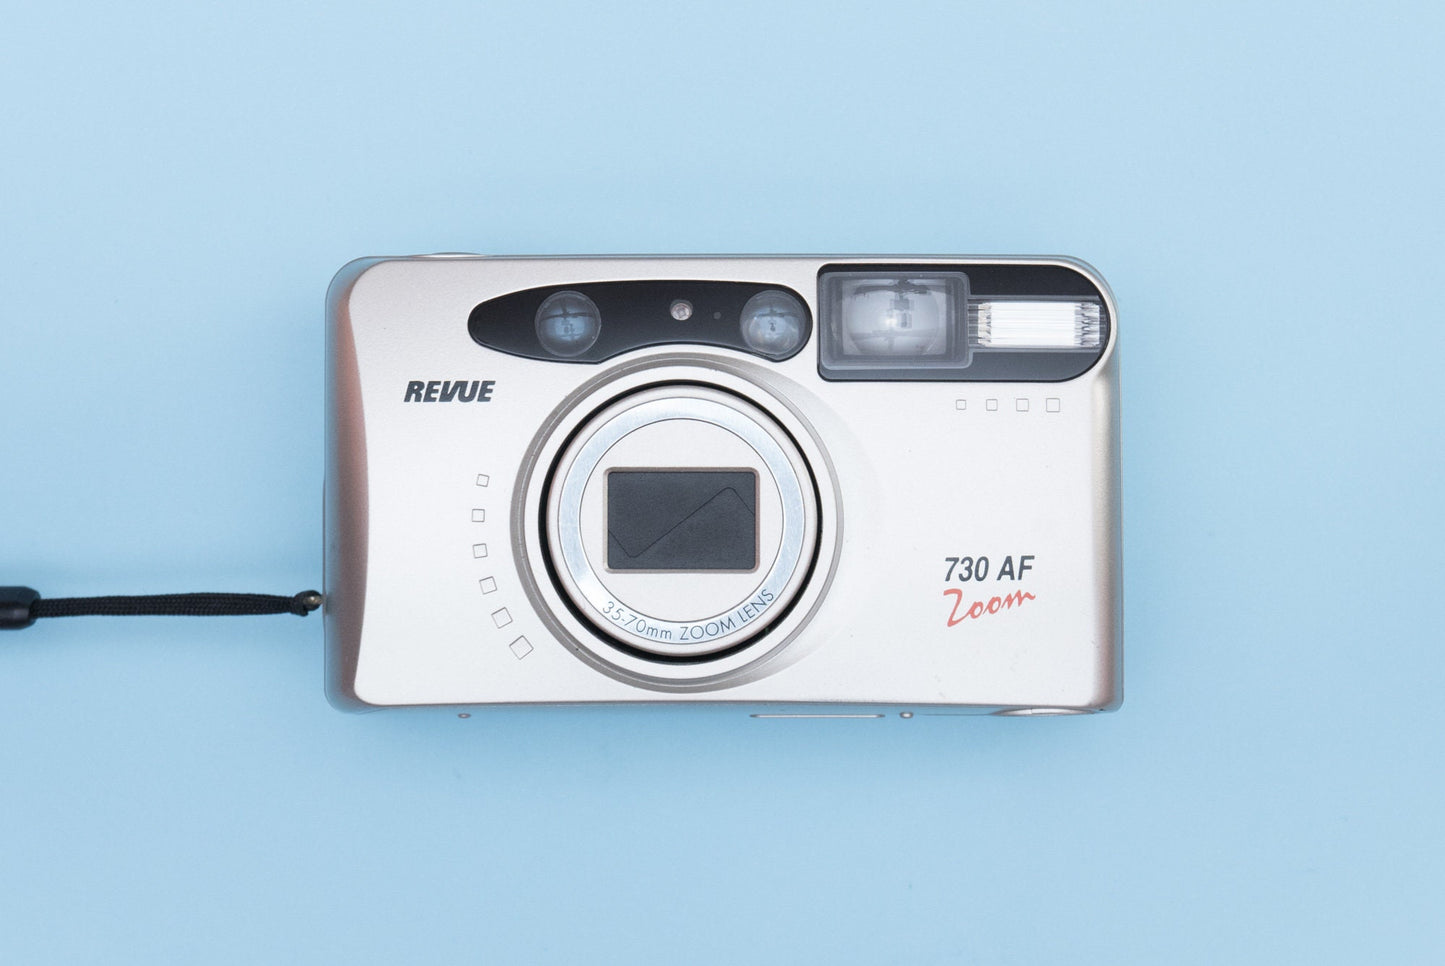 Revue 730 AF Zoom Compact Point and Shoot 35mm Film Camera